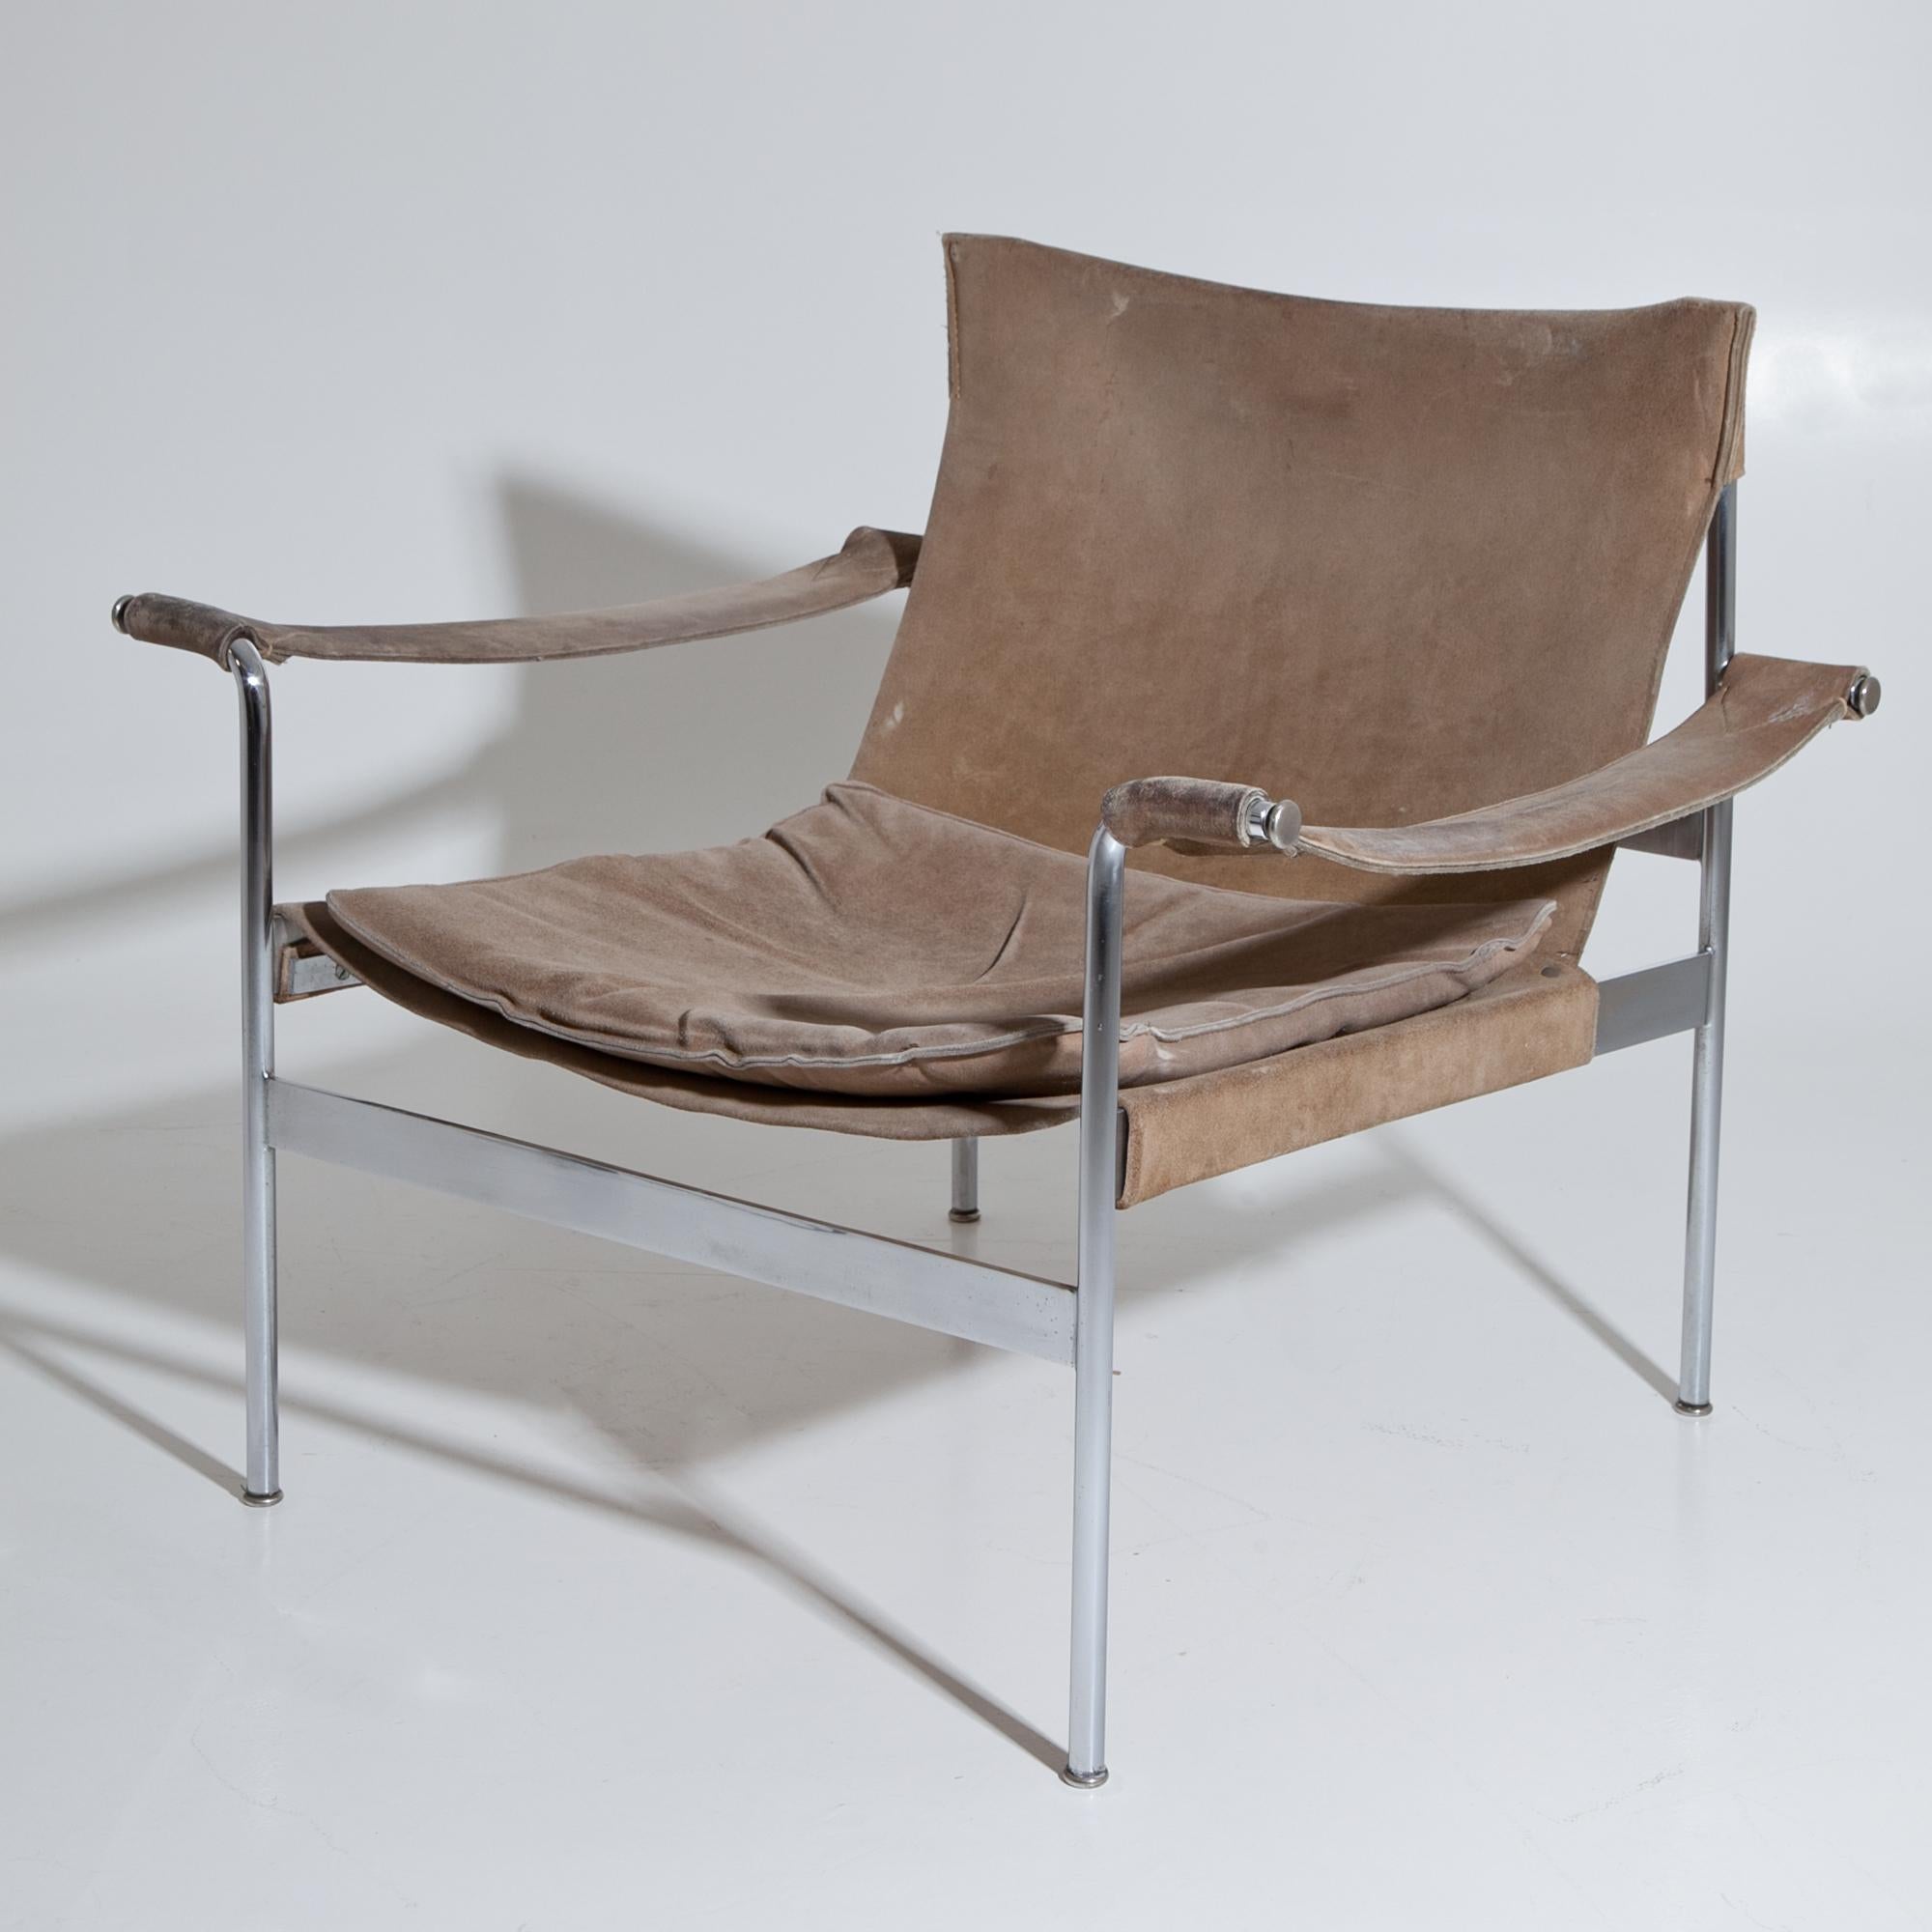 D99 armchair out of chromed steel with suede upholstery, designed by Hans Könecke for Tecta in 1965.